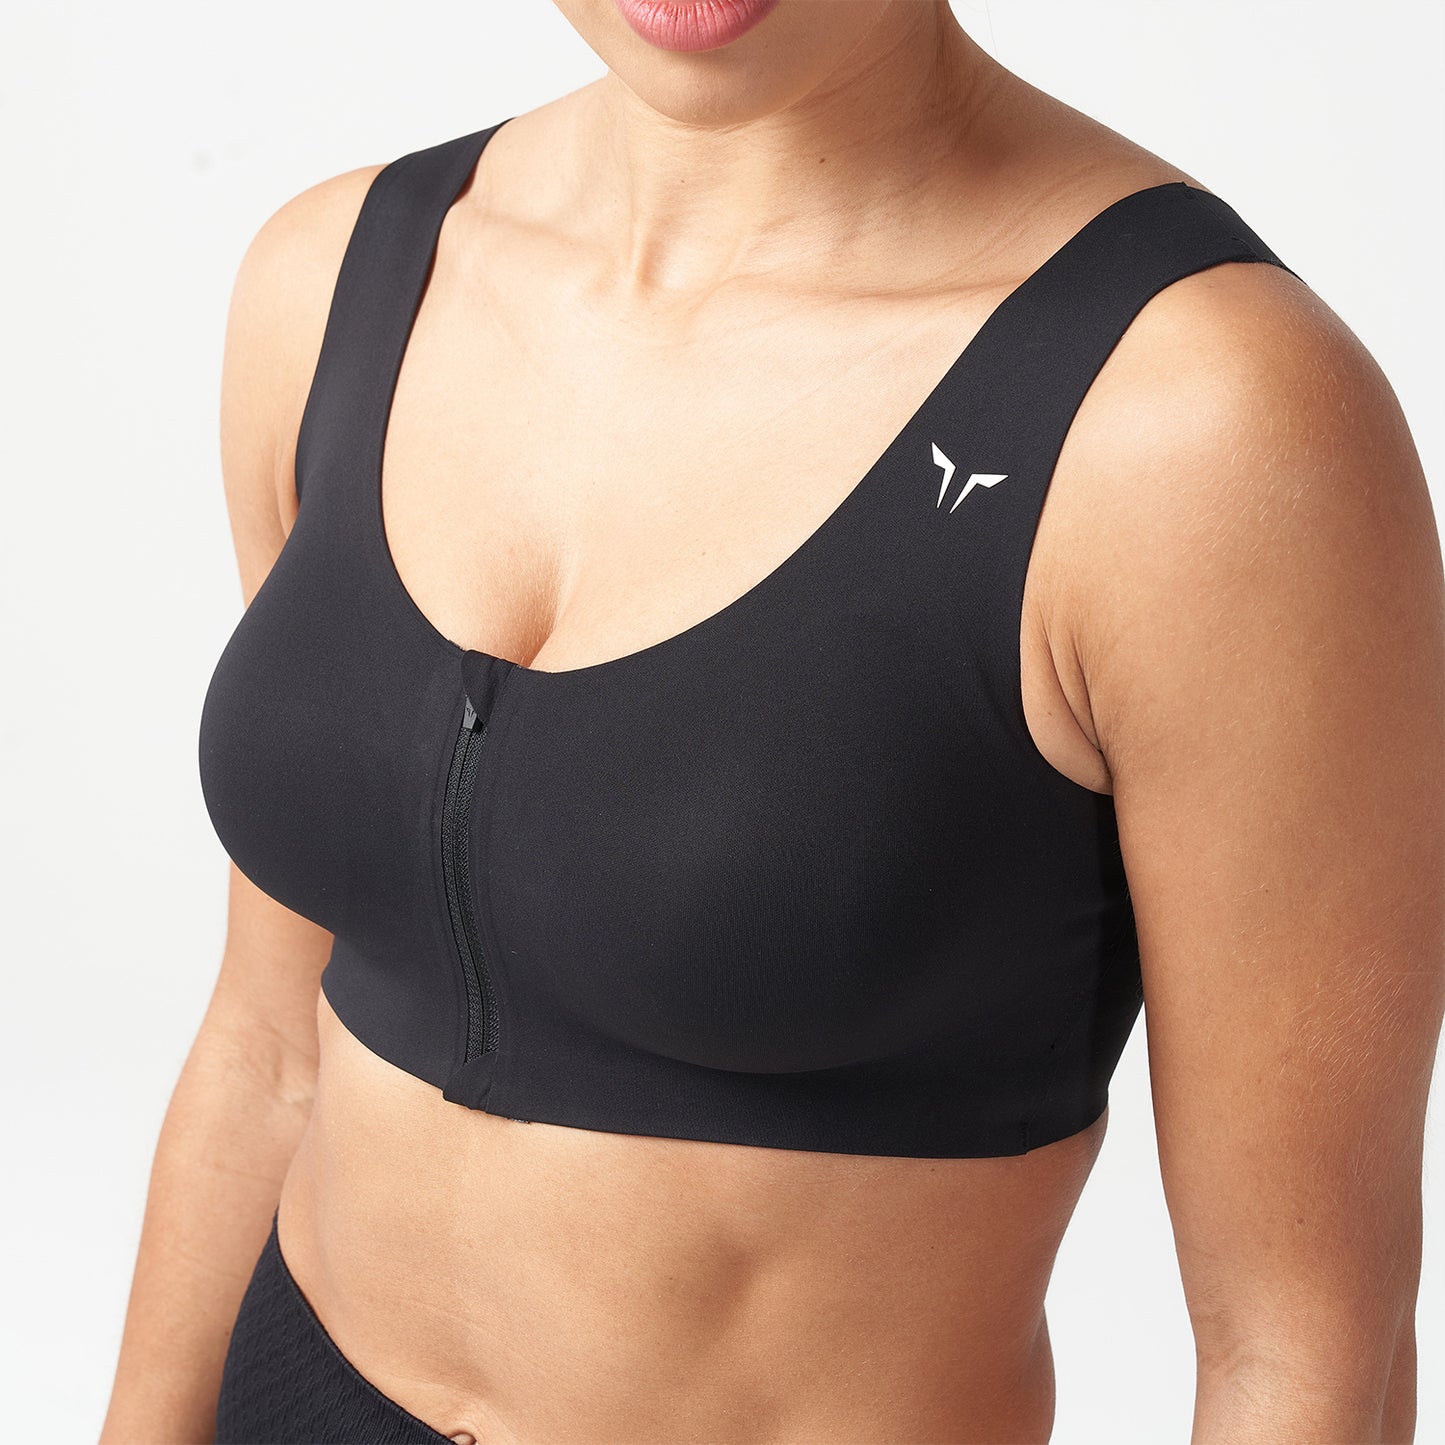 squatwolf-workout-clothes-lab360-every-day-zip-up-bra-black-sports-bra-for-gym